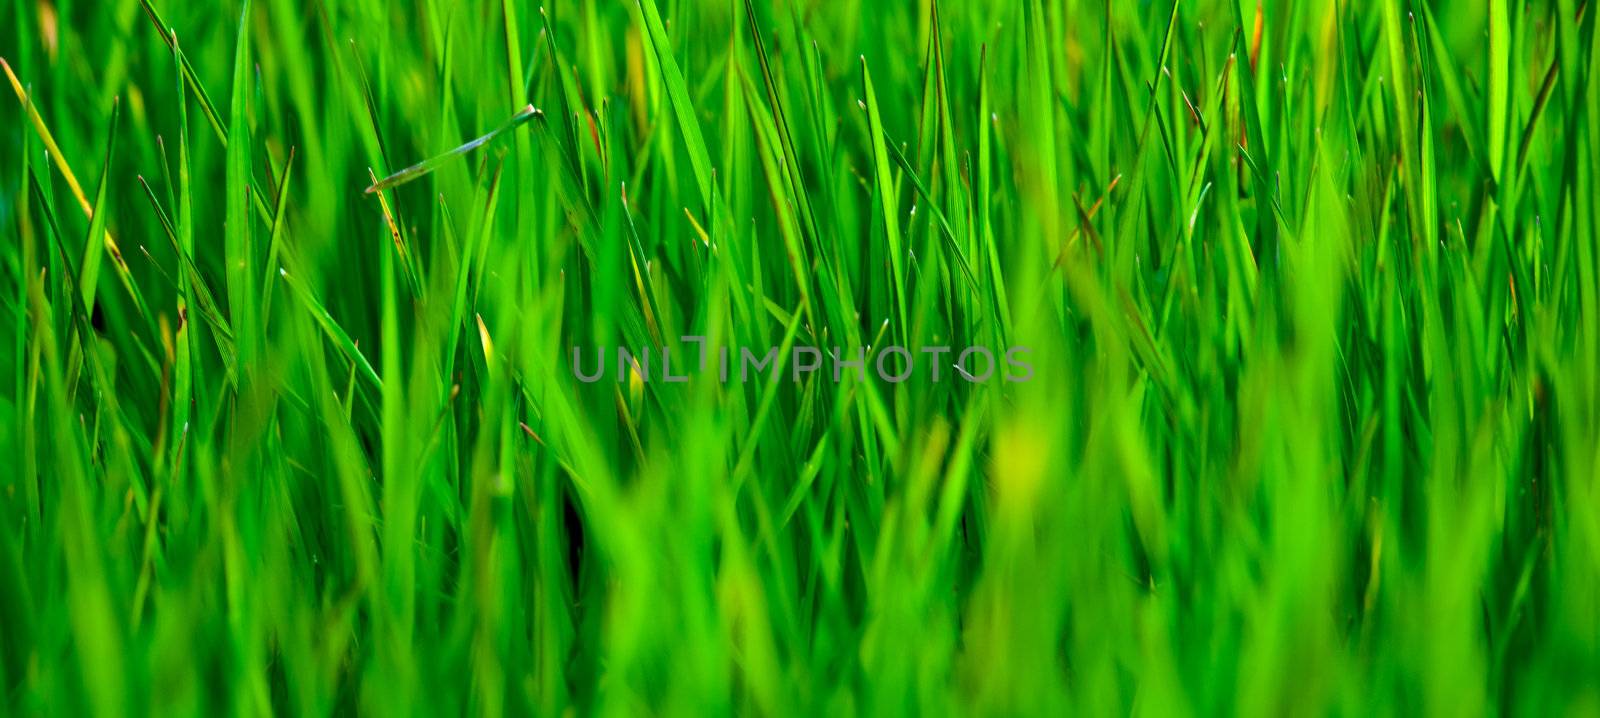 Grass by Iko